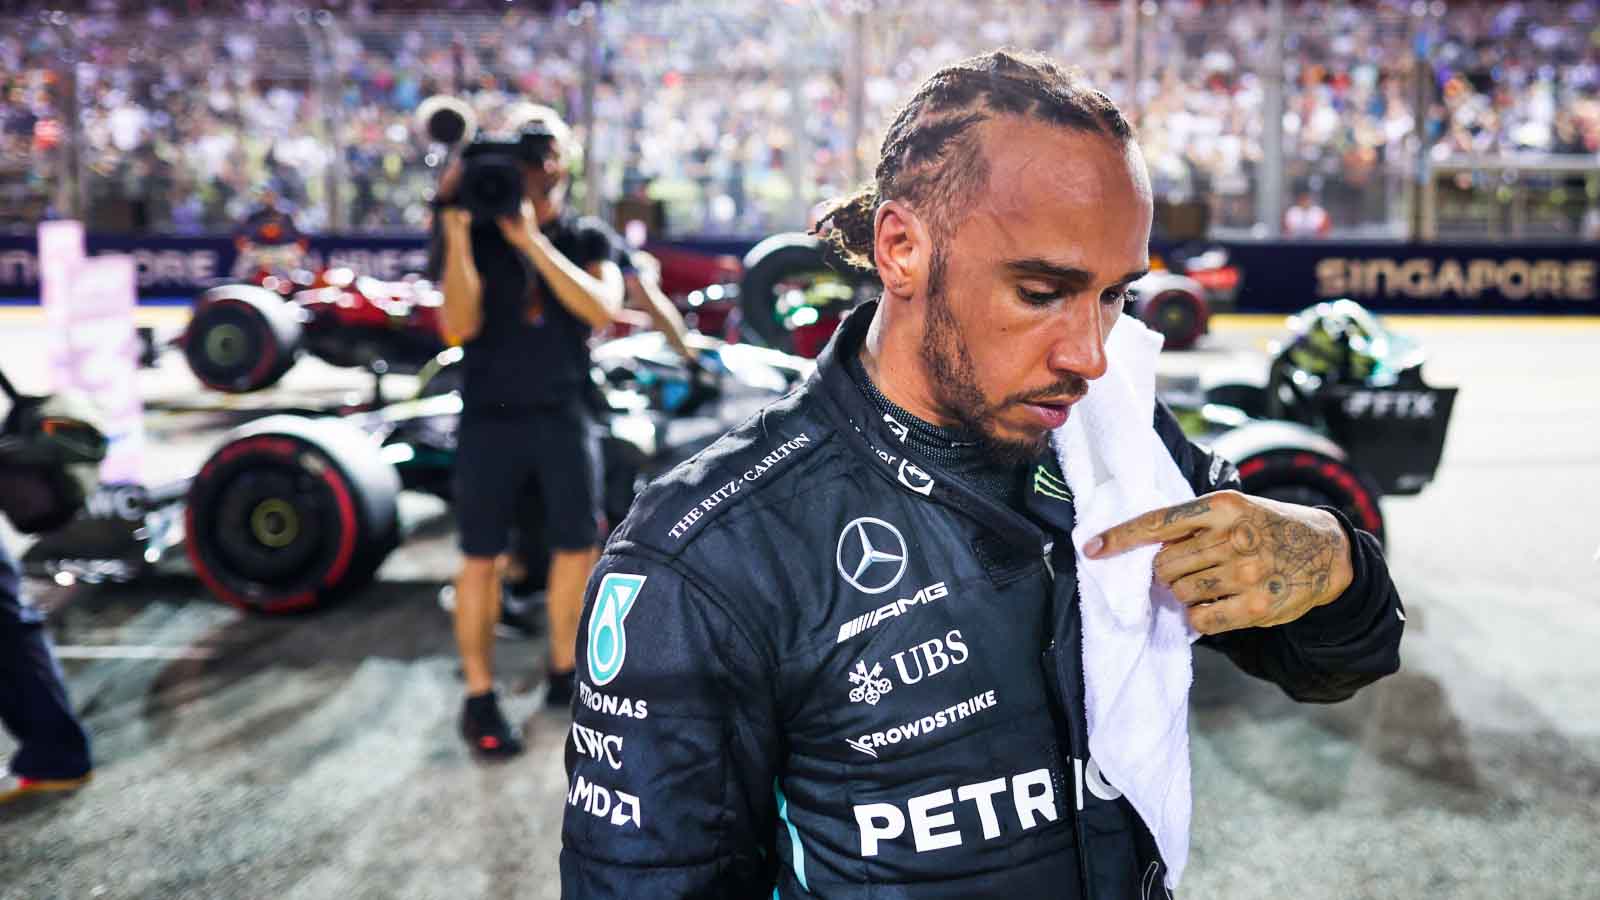 Lewis Hamilton Says He Refuses To Let FIA’s Clampdown Hold Him Back From Speaking About Black Issues